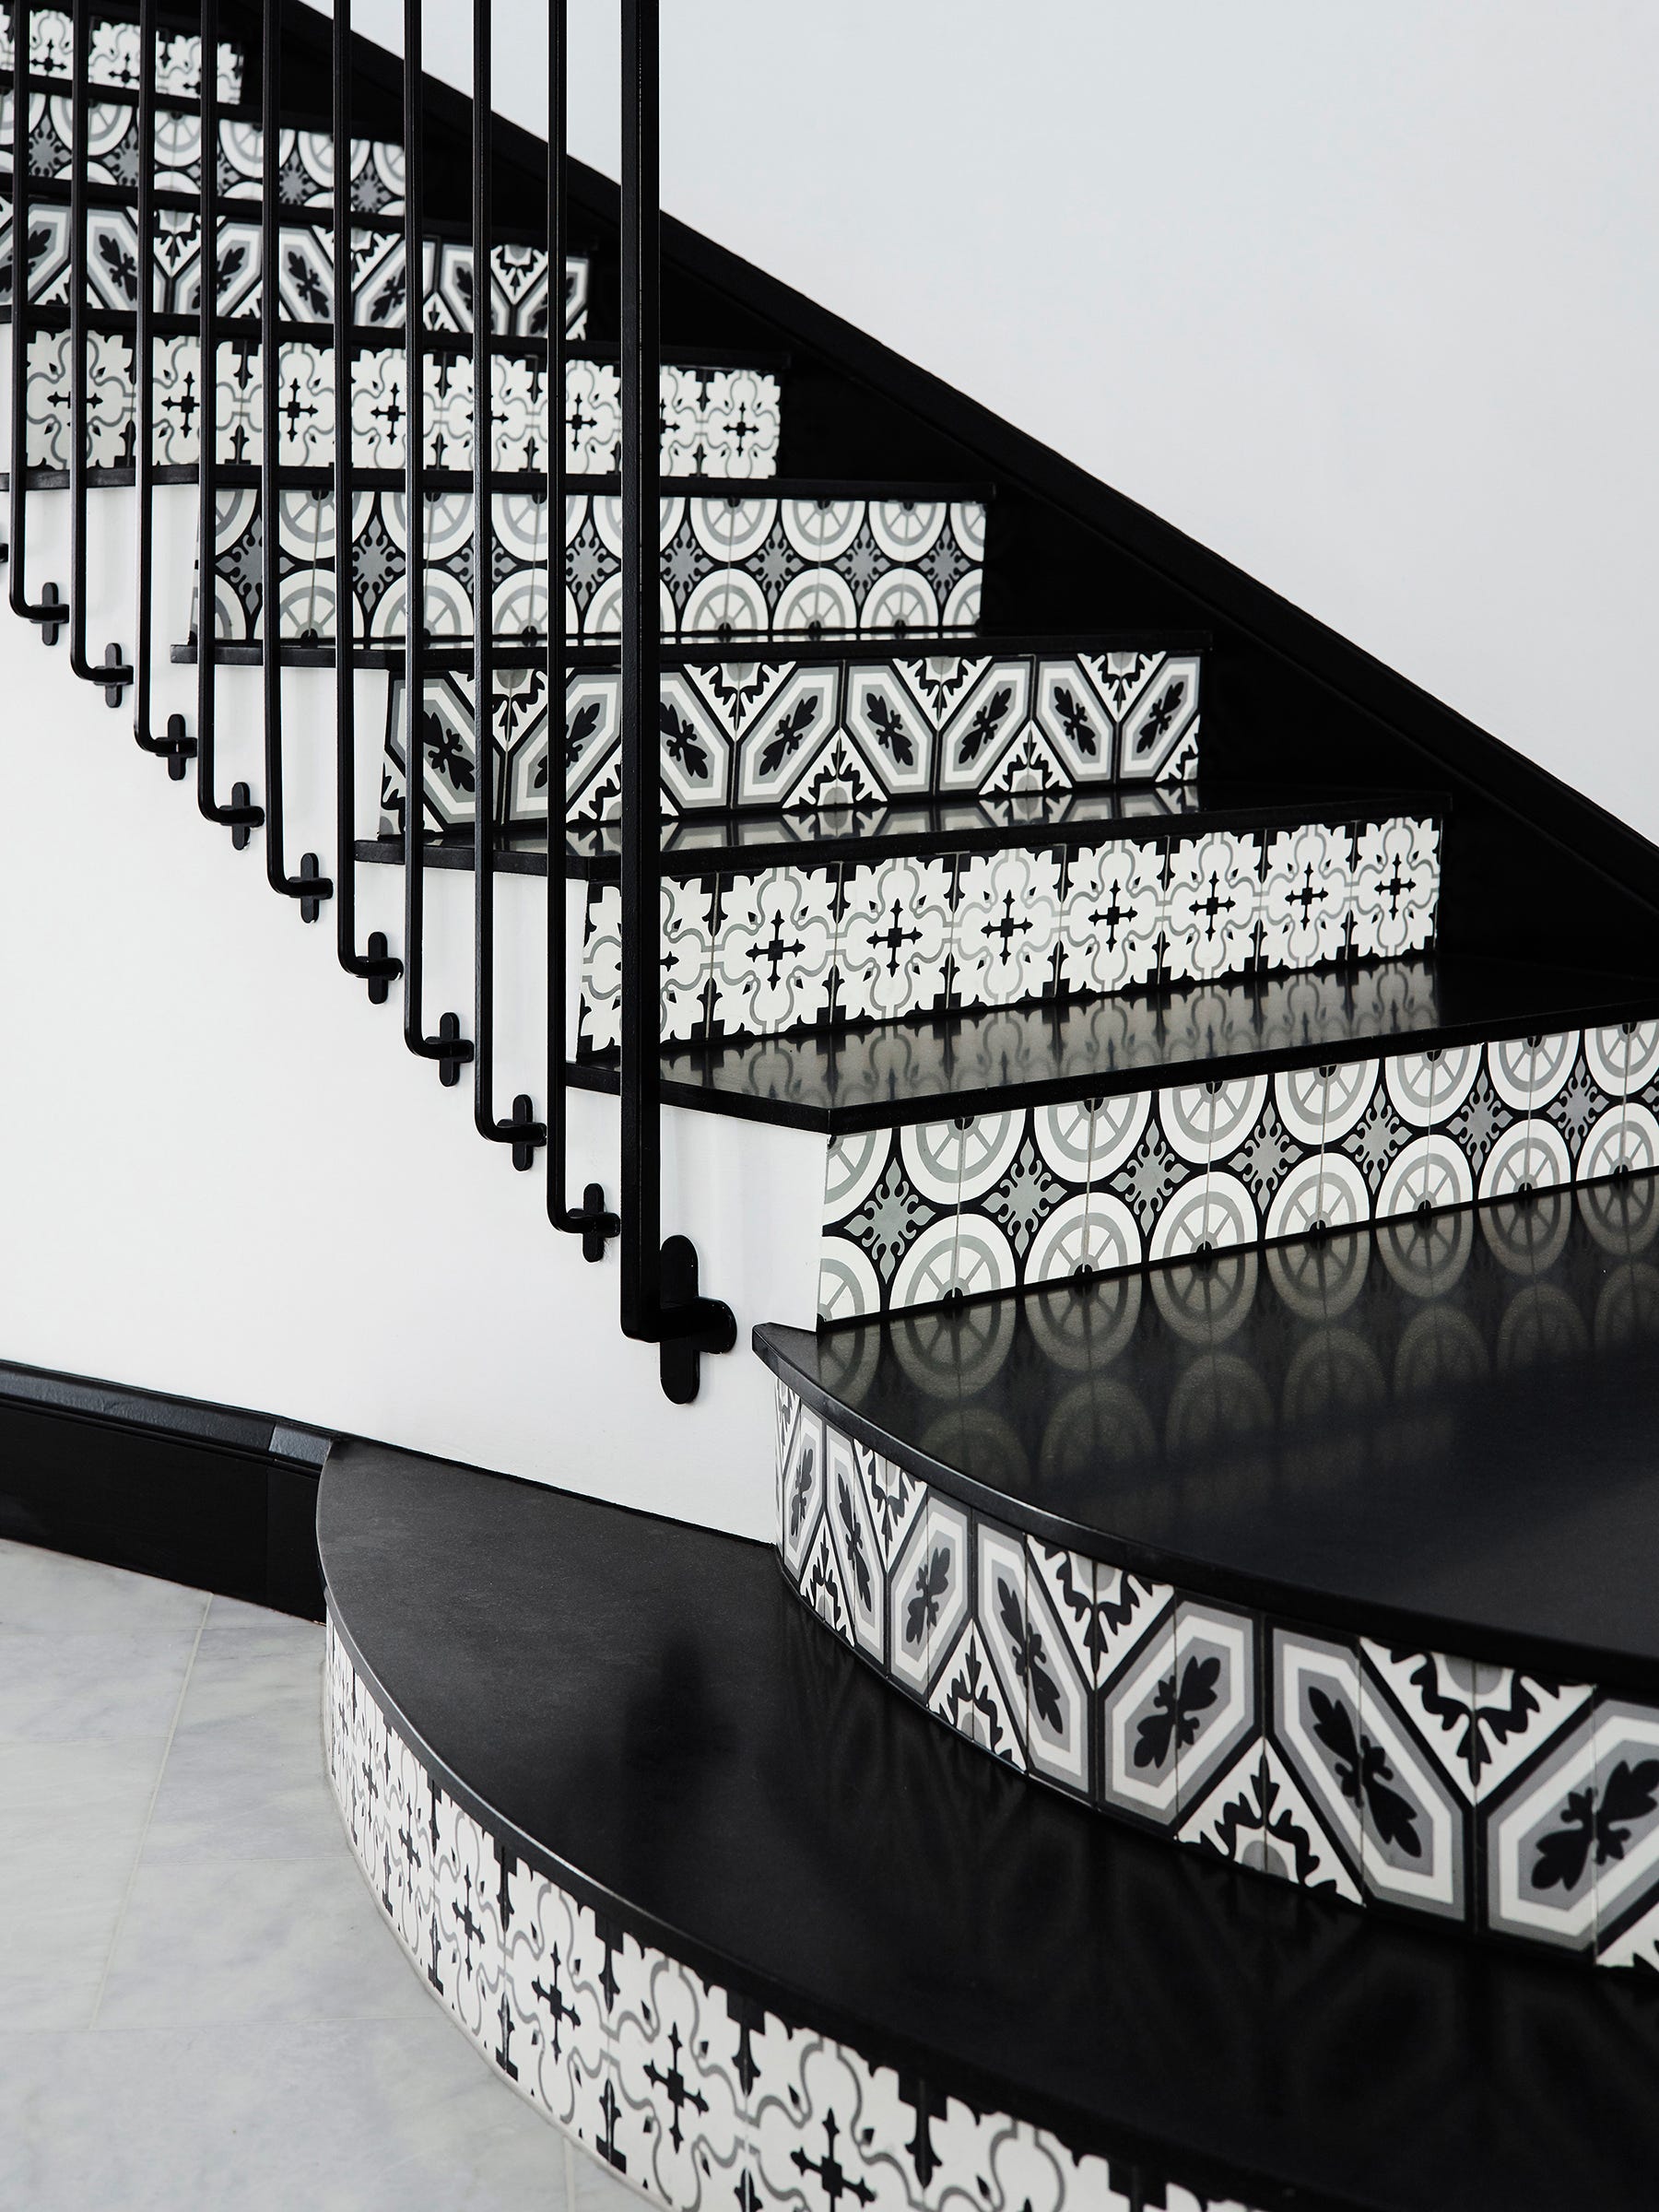 Black granite treads paired with patterned concrete tiles -- Natale's design manufactured by Teranova -- on the risers in this Spanish Revival-style decor. The client wanted a grand Hollywood-style stair. The designer says the patterns' alluring rhythm draws the eye up, and the repeated lines of the iron balustrade contribute to the drama.